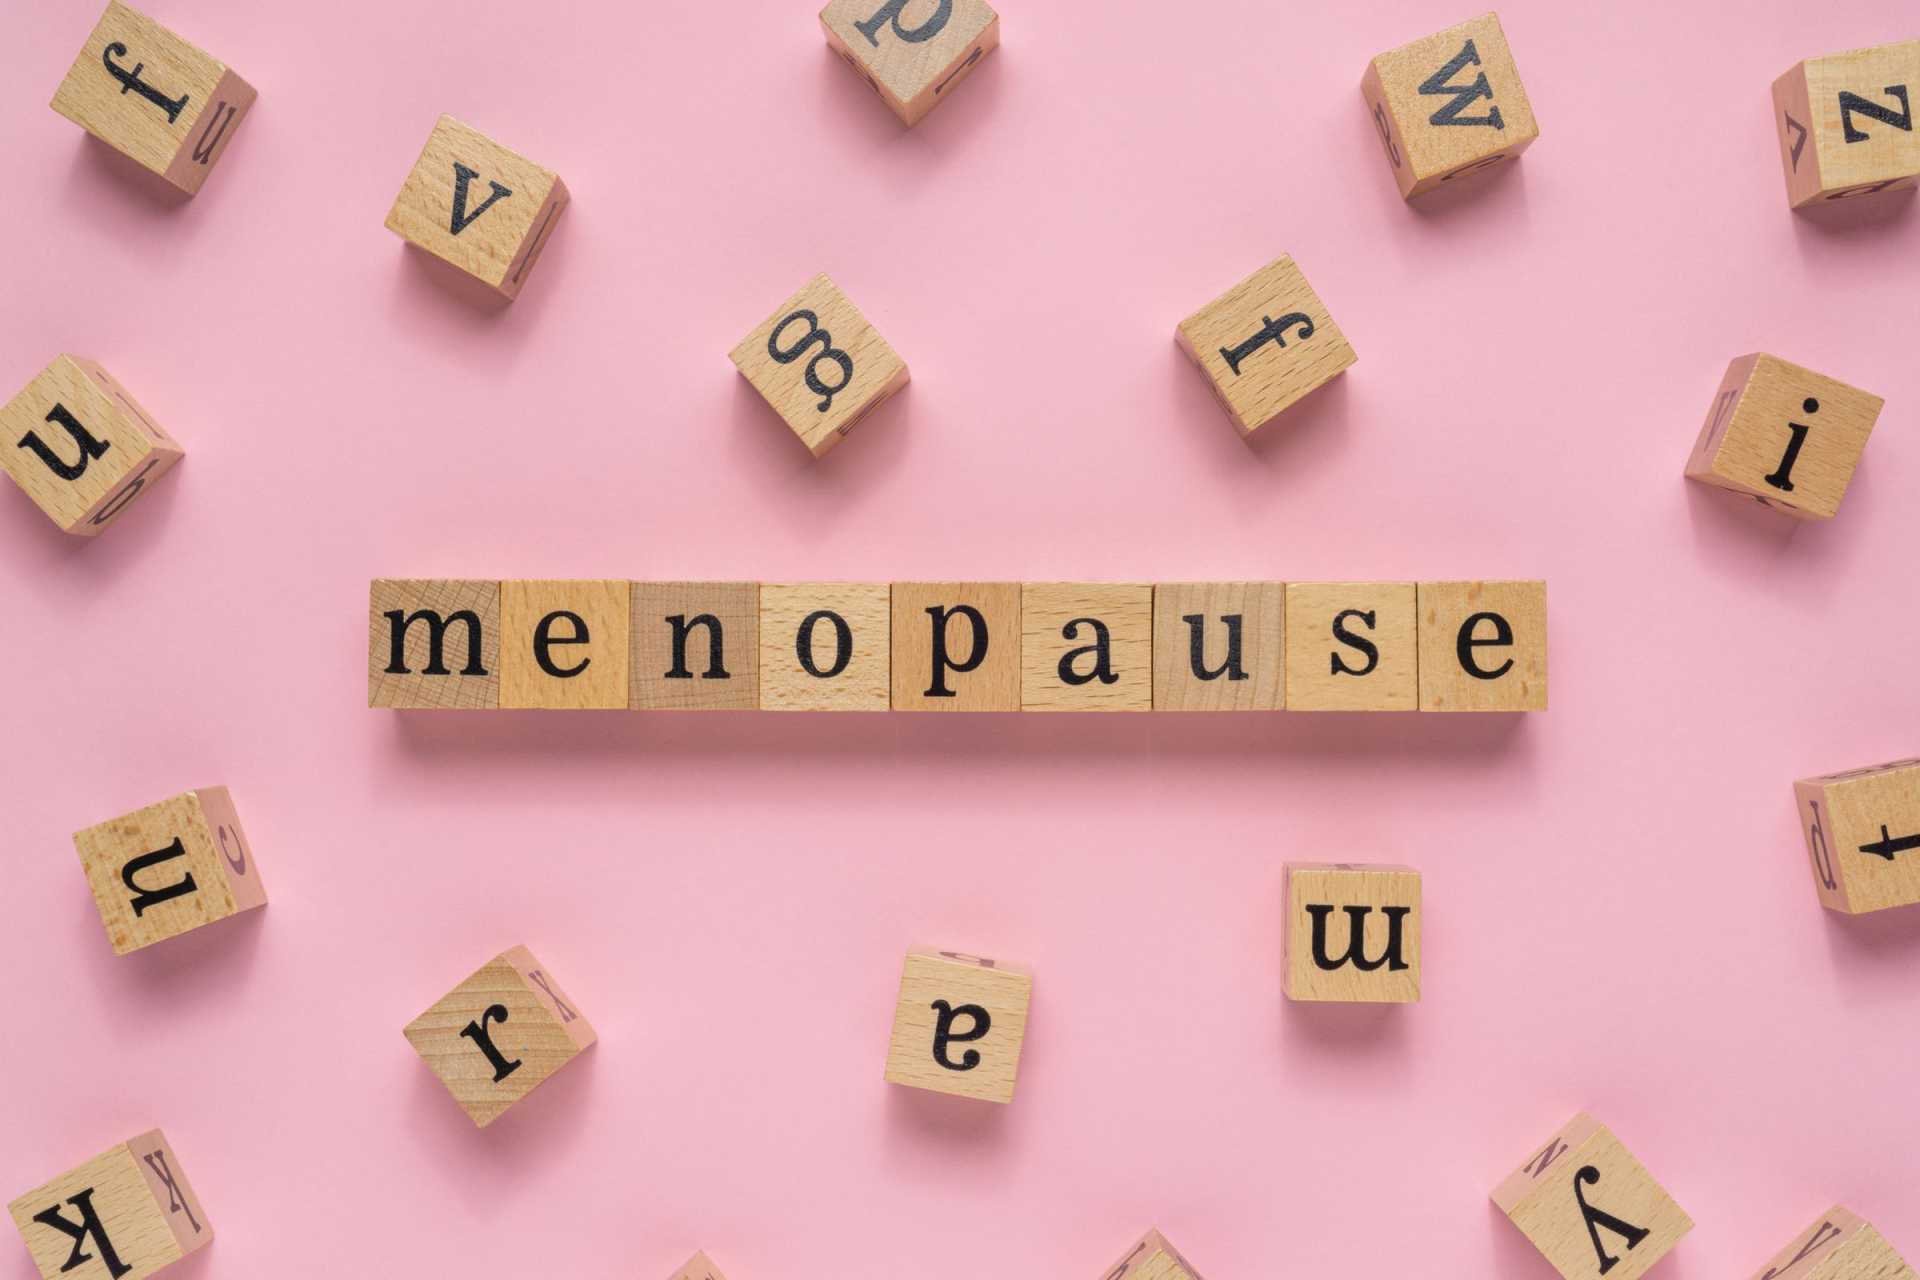 Scrabble tiles spelling out menopause on a pink background